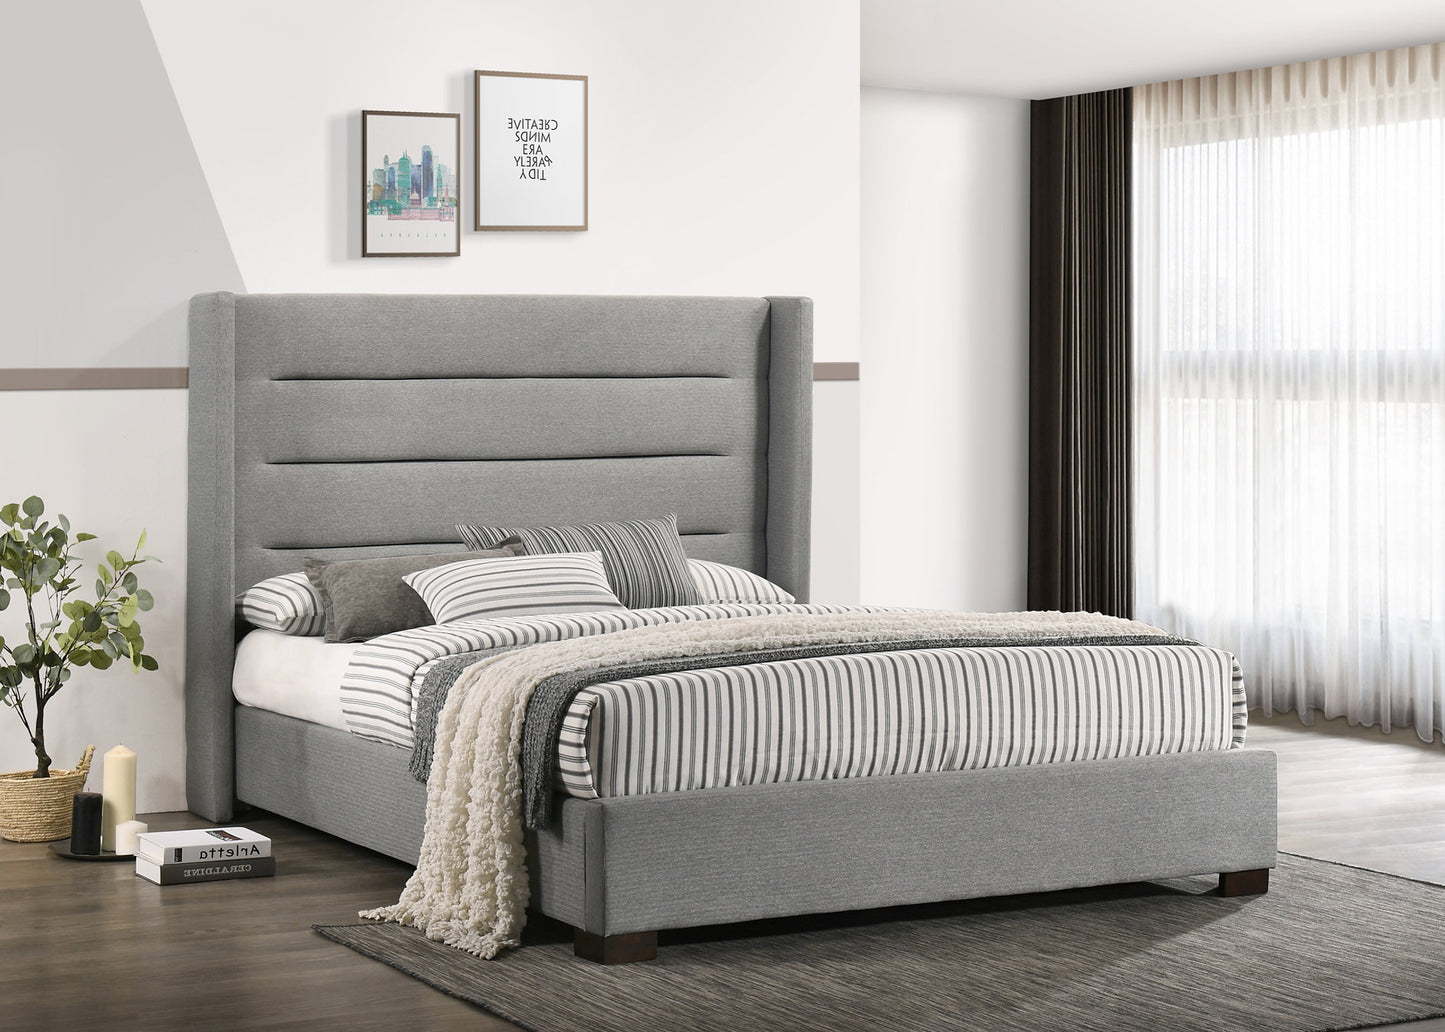 Modern Upholstered Bed Frame with Wingback Headboard & Horizontal Tufted Panels